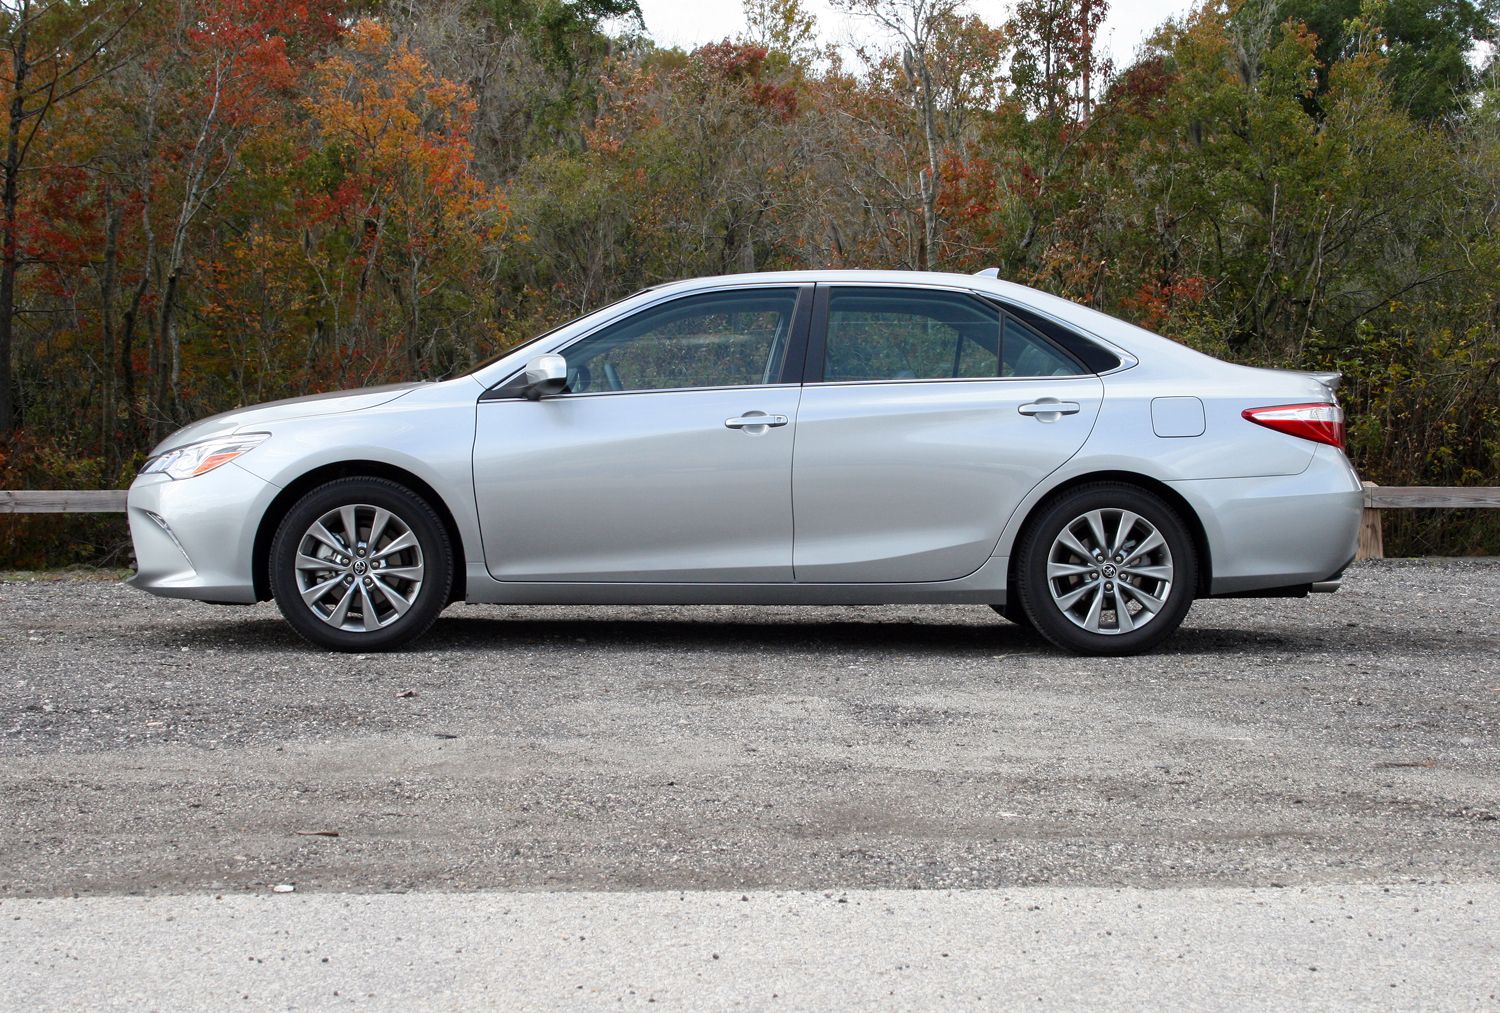 2015 Toyota Camry - Driven